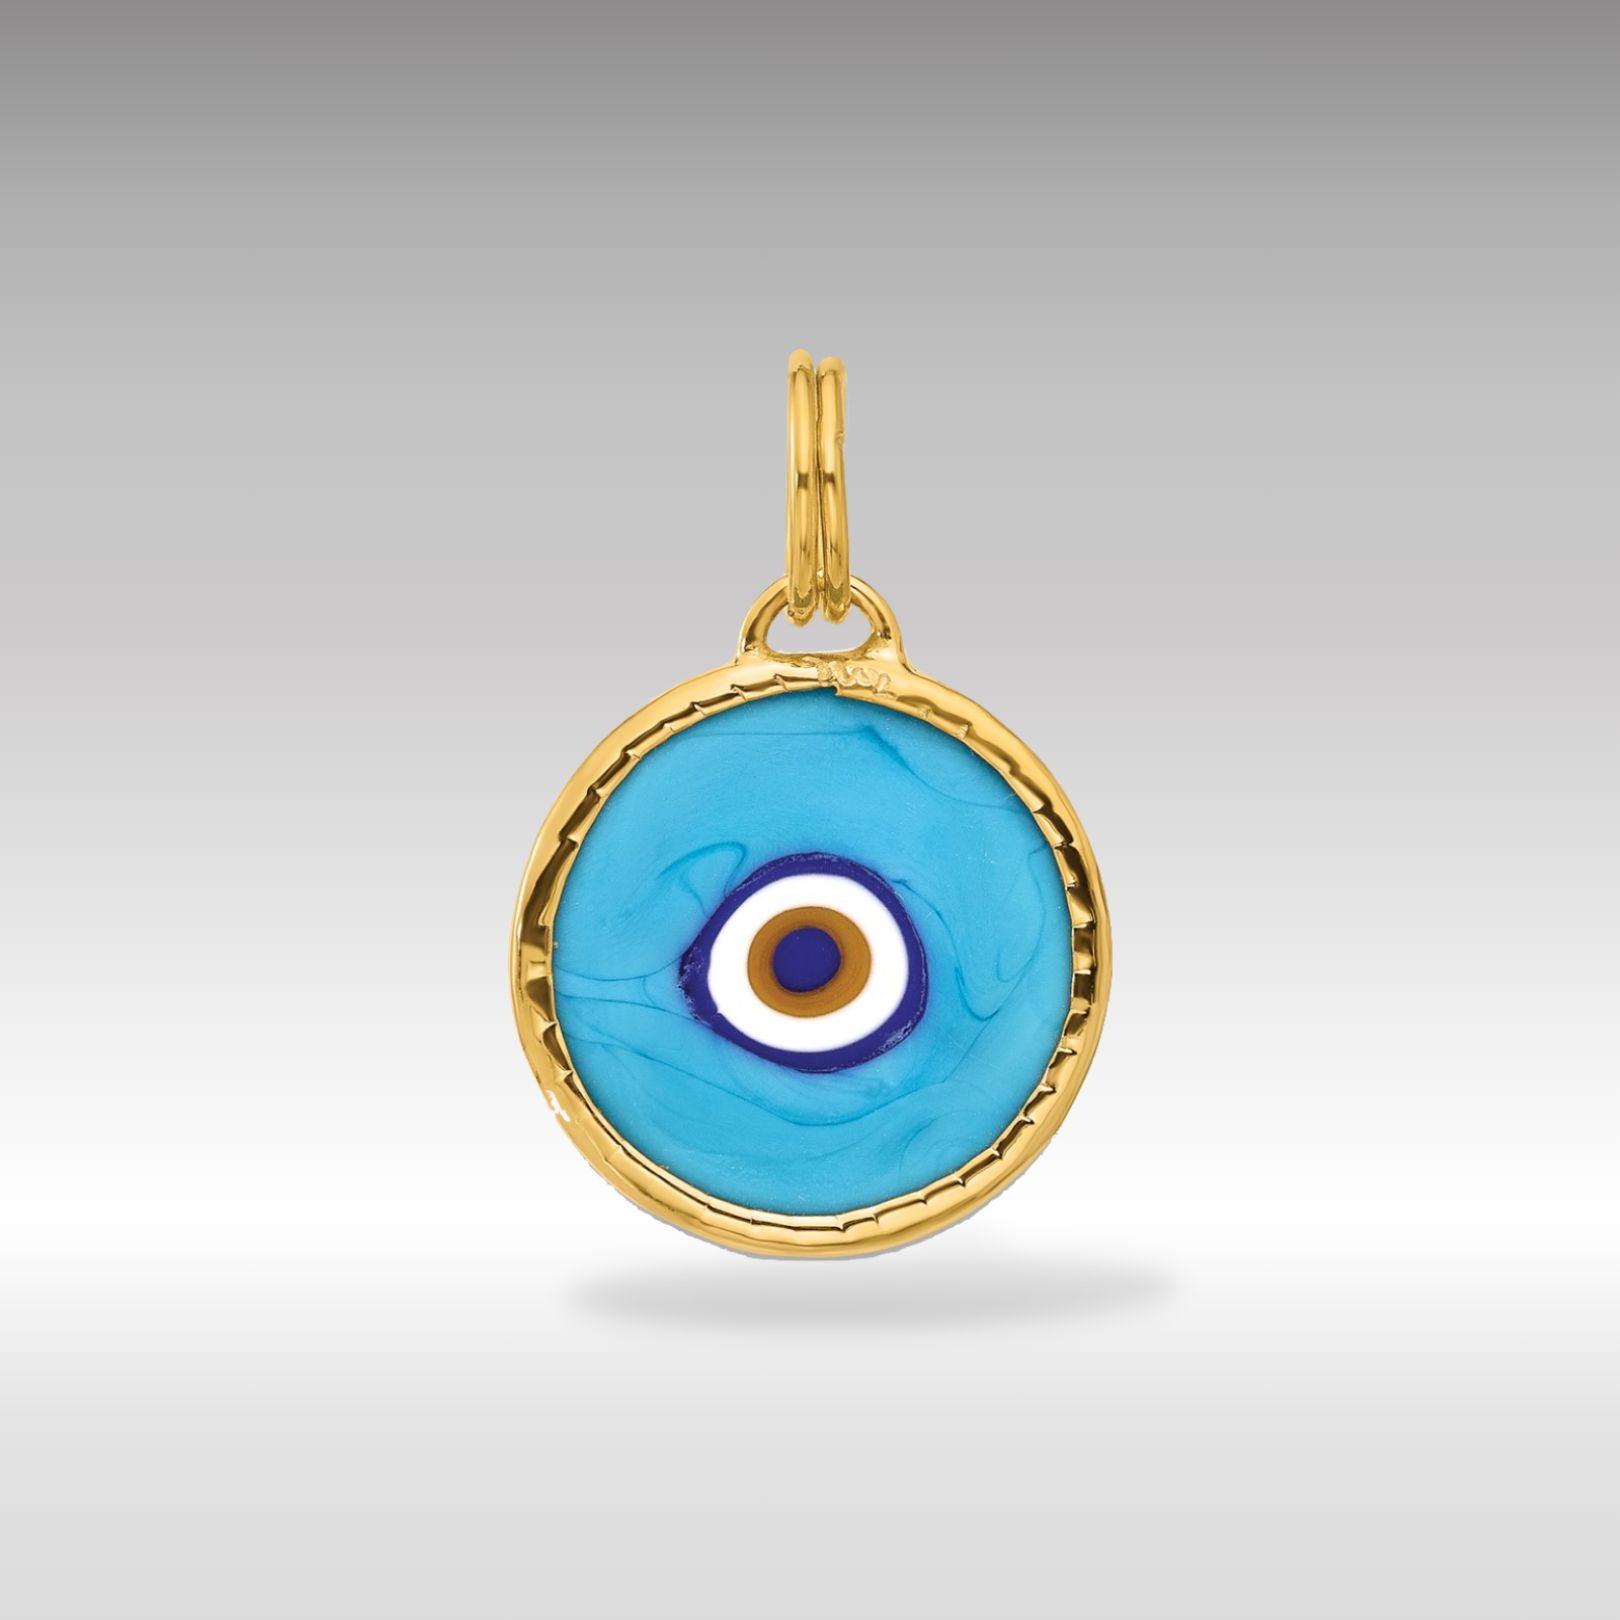 14K Gold Pendant with Turquoise Color Opaline Glass Evil Eye - Charlie & Co. Jewelry